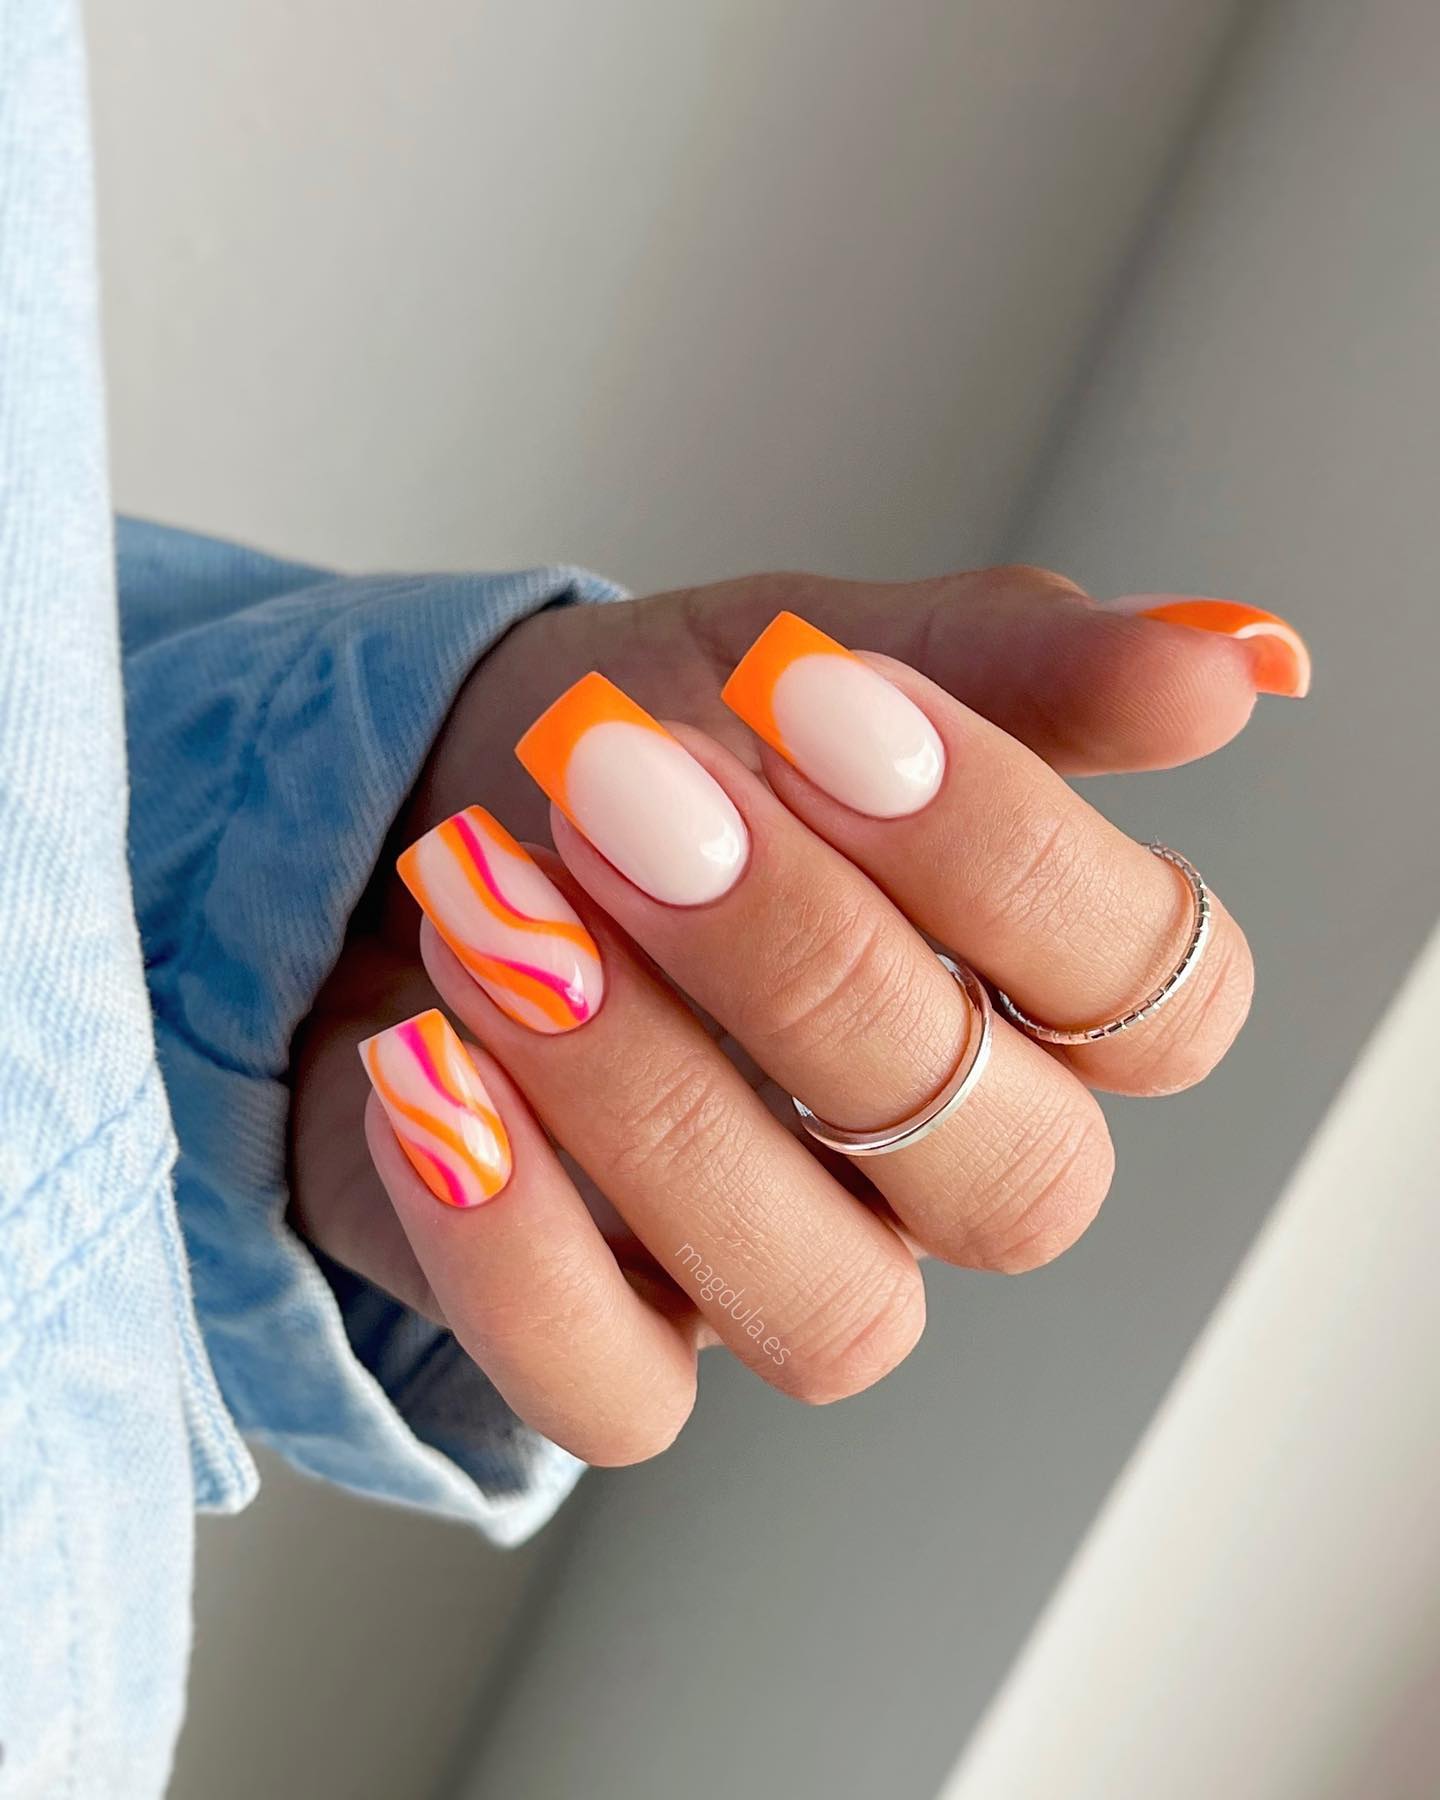 Those who are looking for something bold and fun, but also want to stay within the realm of classic style, orange French tips are great! When the sun is shining, your nails will shine, too. Plus, two accent nails with pink and orange swirls are so nice to go for.